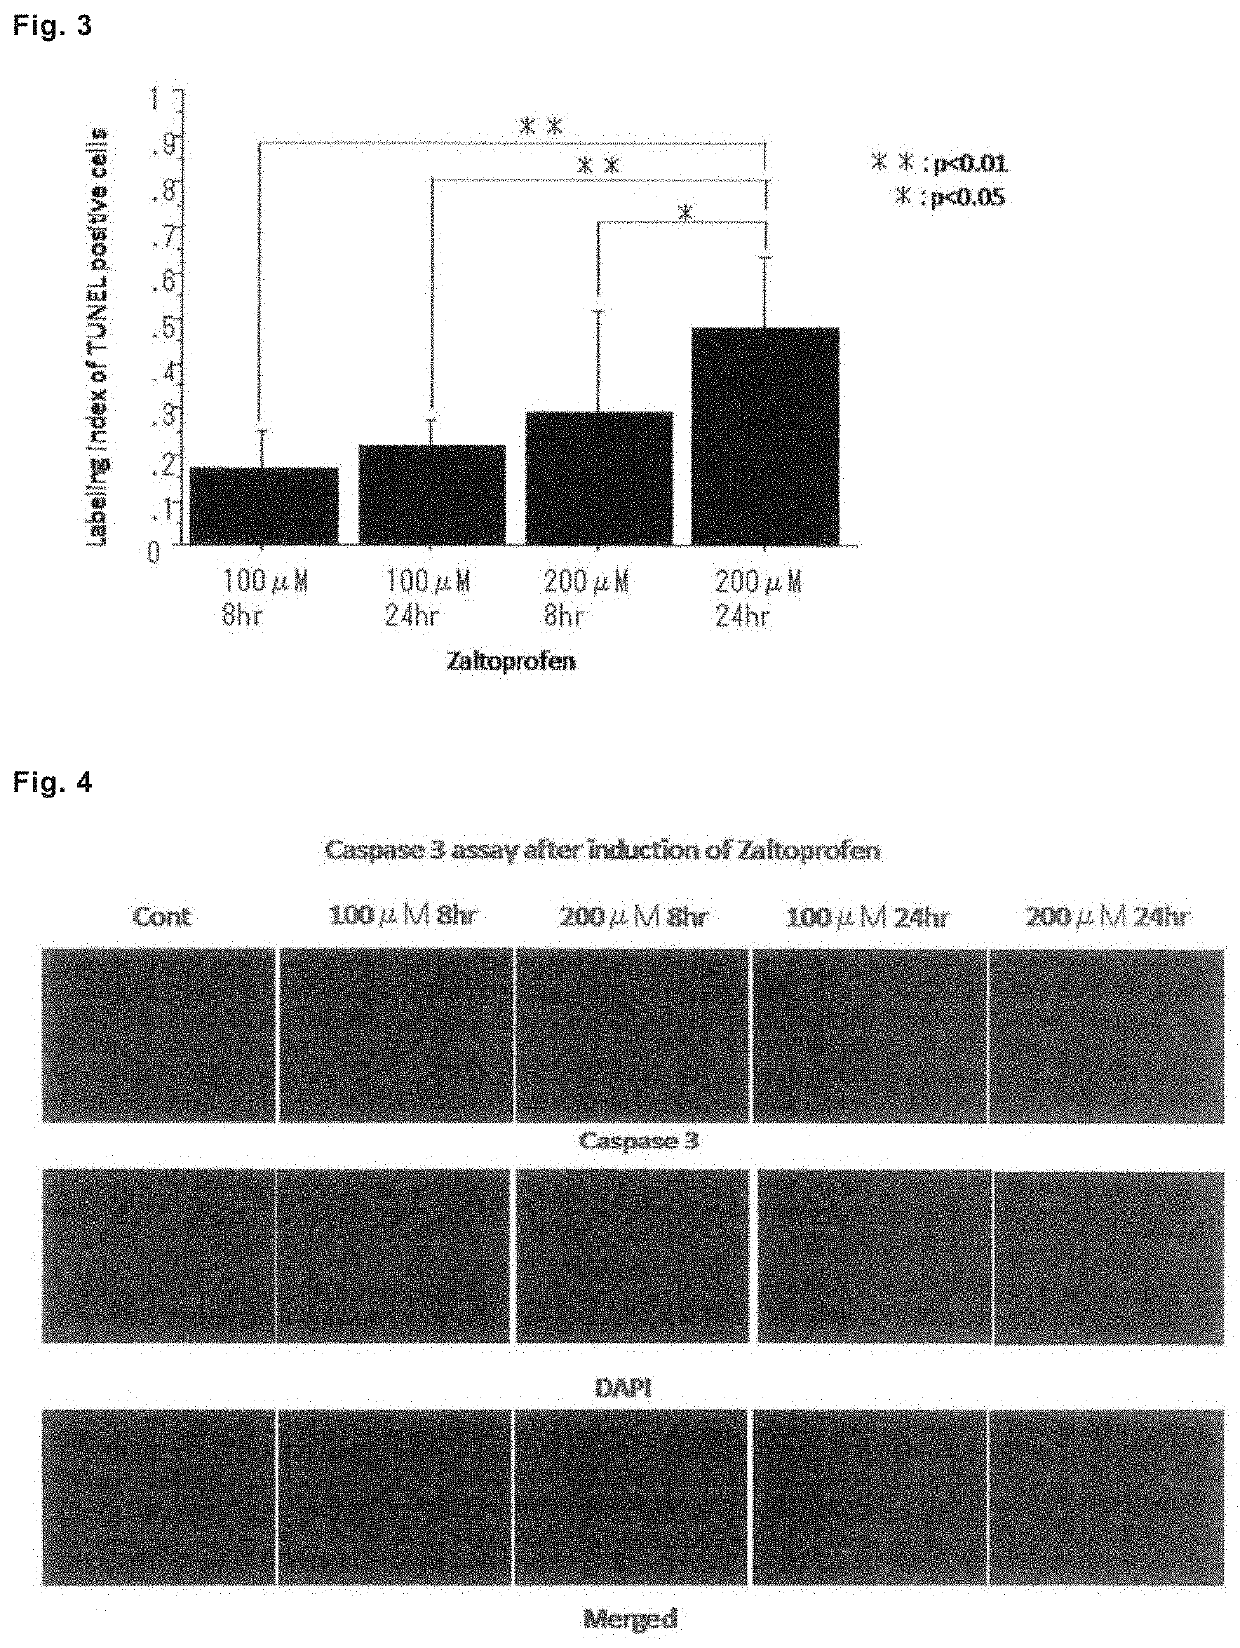 Drug for preventing, treating or preventing metastasis of giant cell tumor that occurs in bone or soft parts, chondrosarcoma, or osteosarcoma, local injection for arterial embolization, and artificial bone